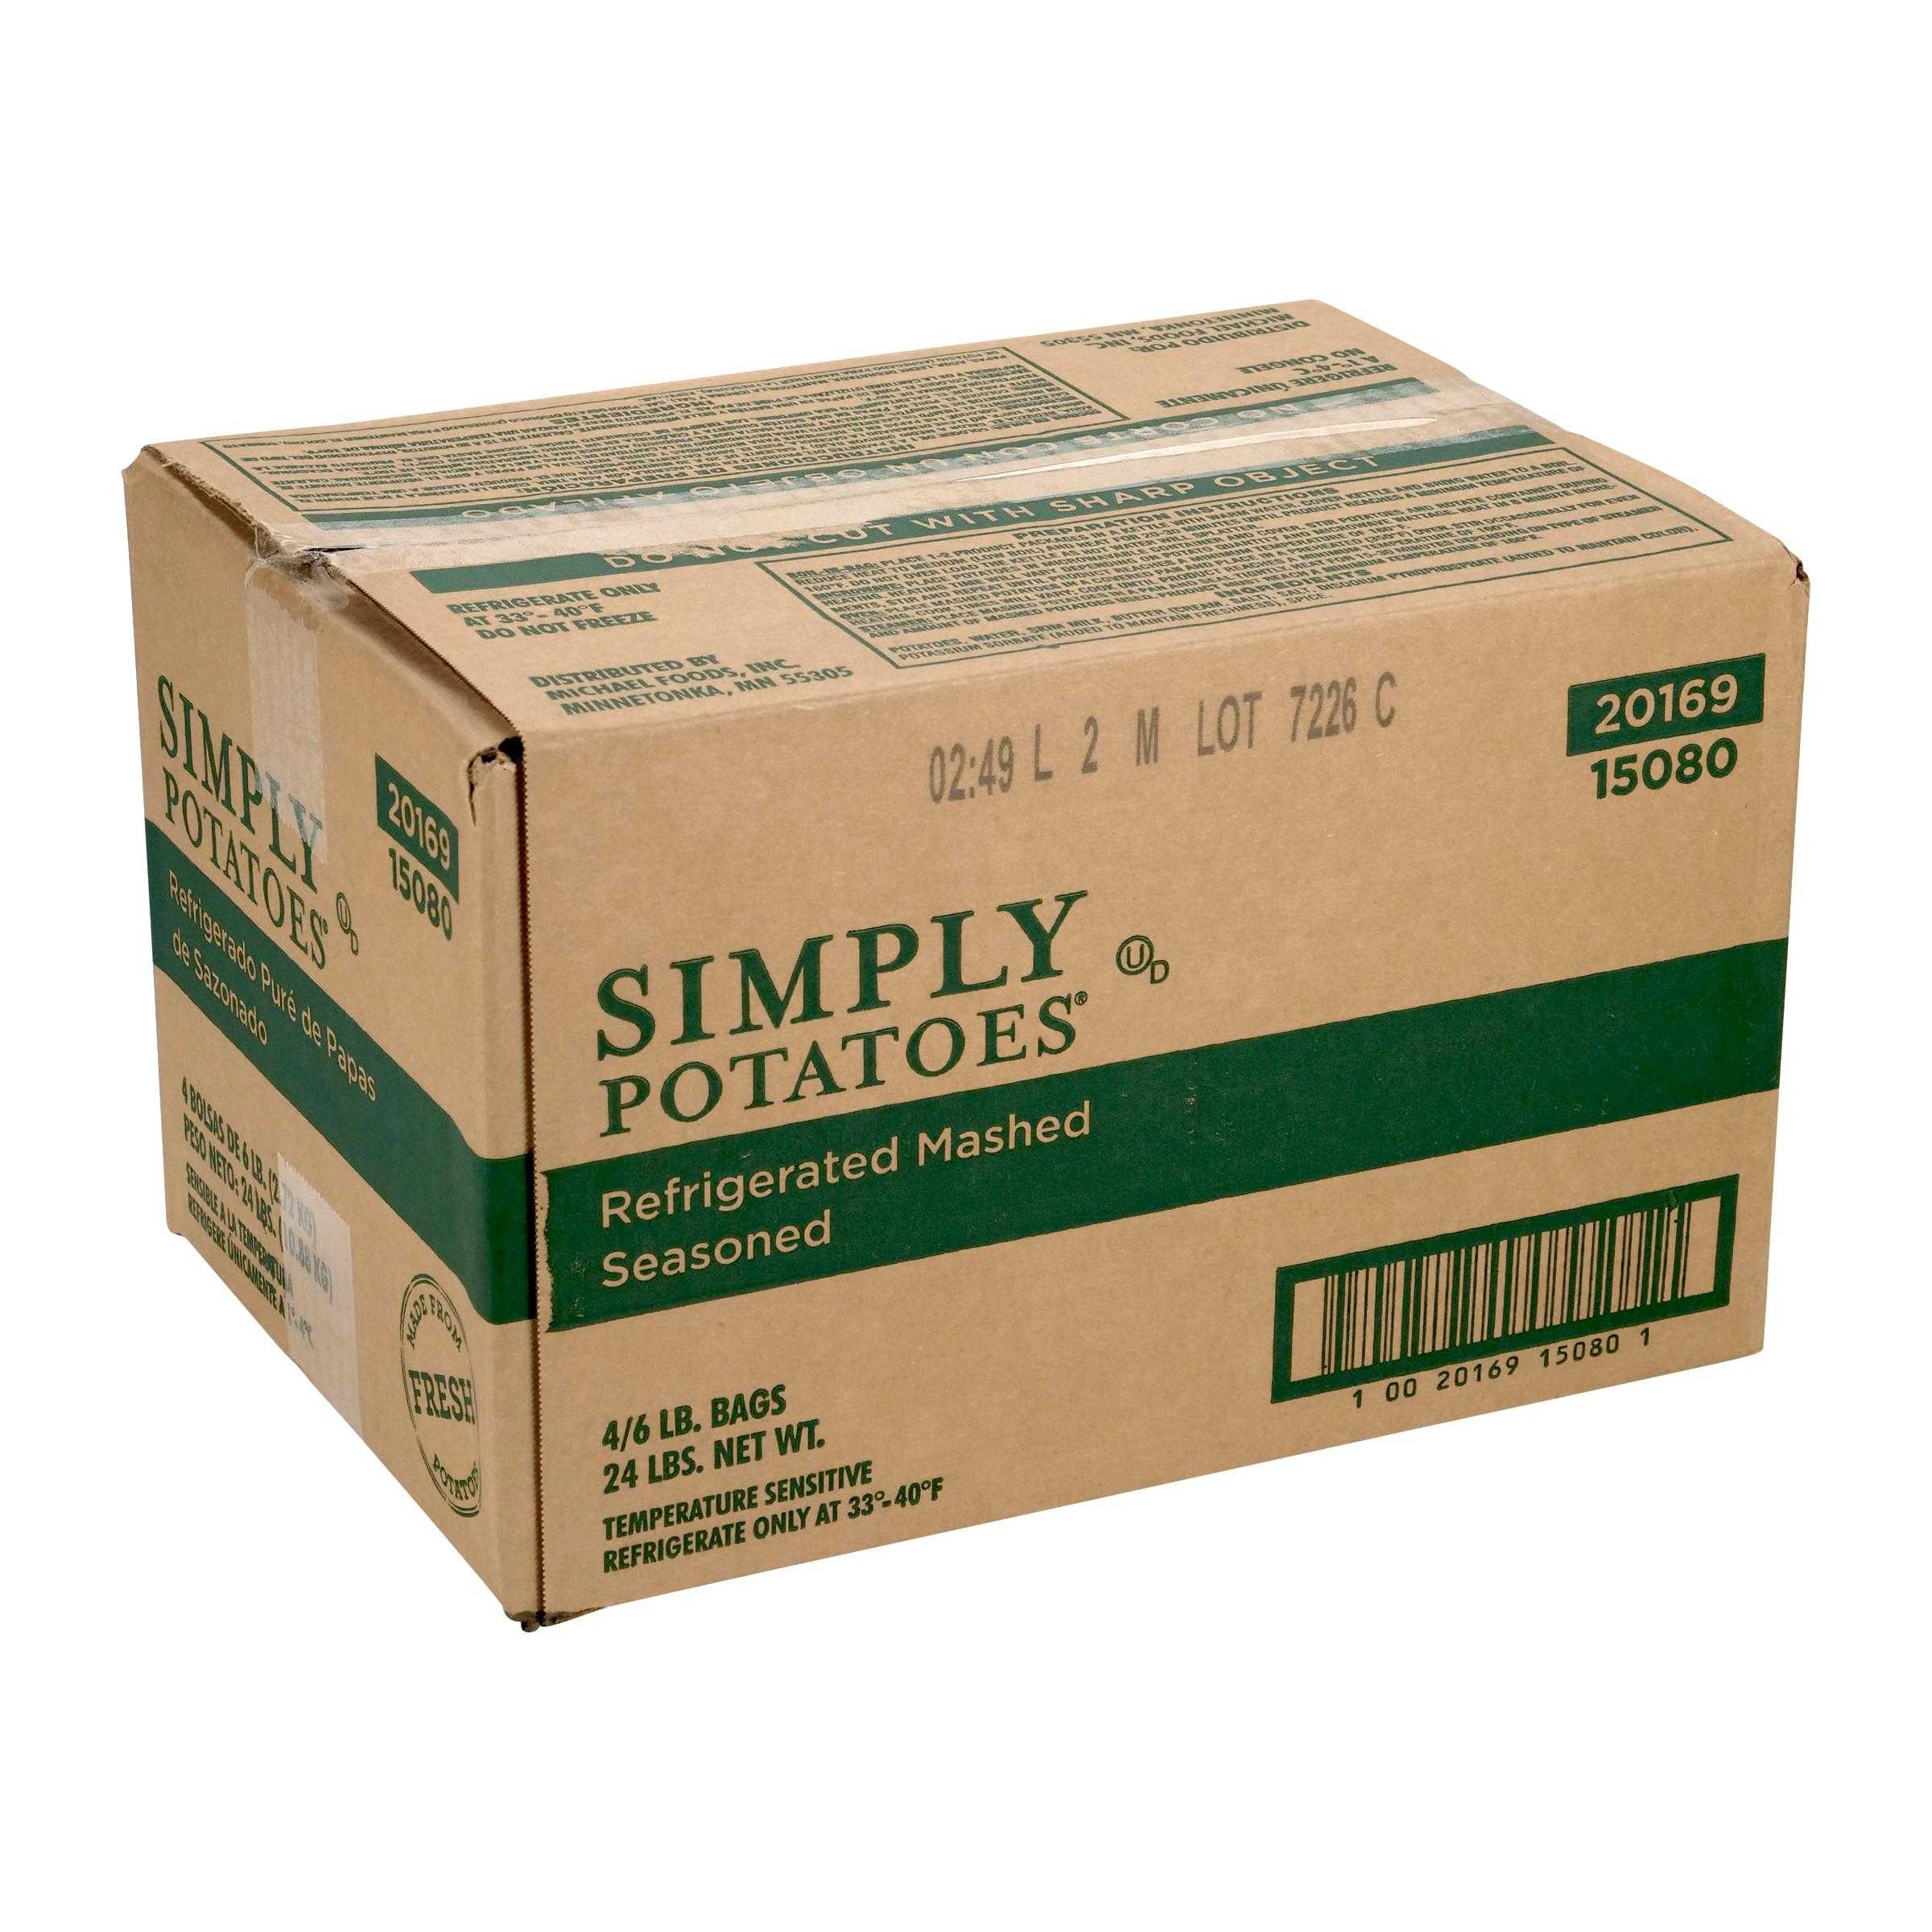 Simply Potatoes® Refrigerated Seasoned Mashed Potatoes made with peeled russet potatoes, 4/6 Lb Bags